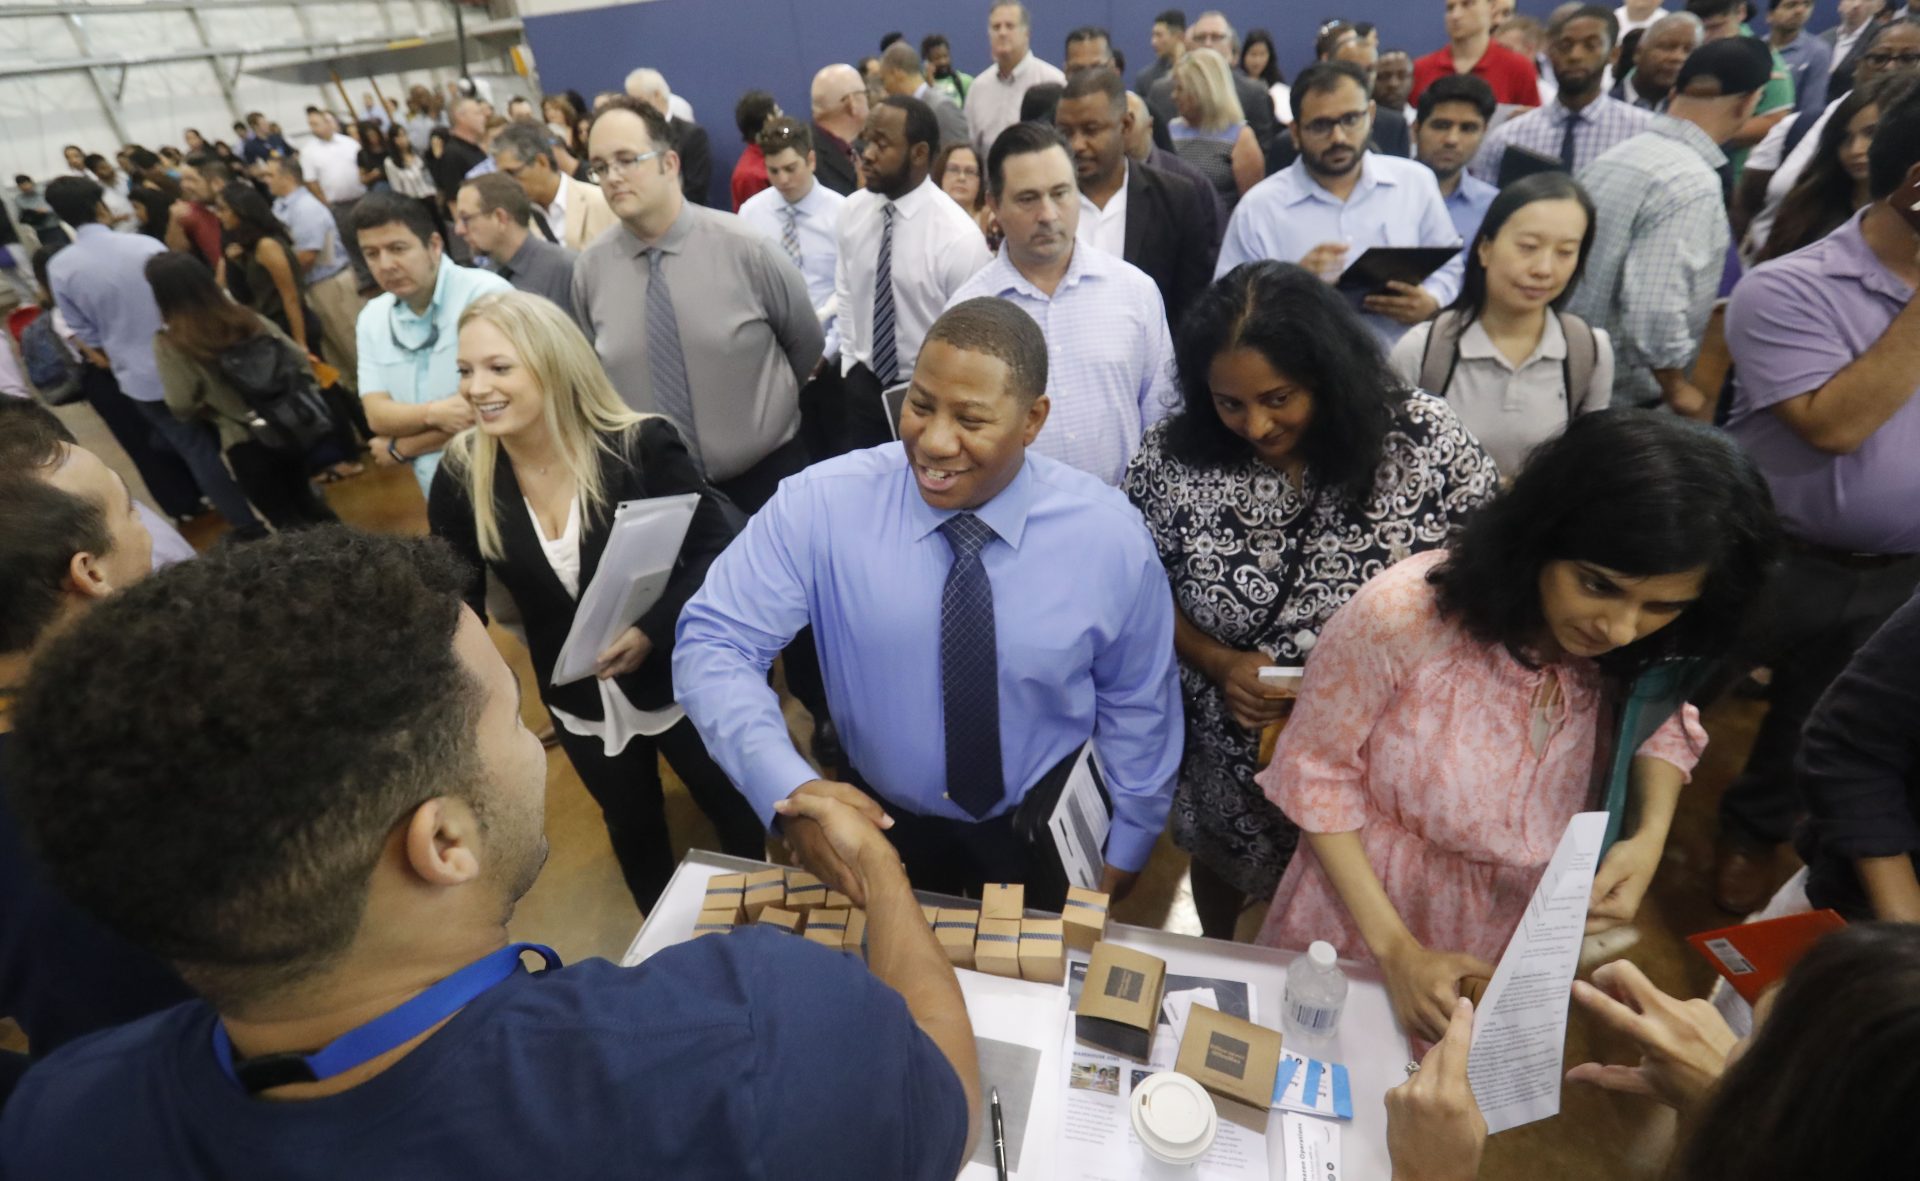 In this Sept. 17, 2019, photo job seeker Cedric Edwards, center, shakes hands with recruiter Allen Lewis, left, during an Amazon job fair in Dallas. On Wednesday, Oct. 2, payroll processor ADP reports how many jobs private employers added in September.